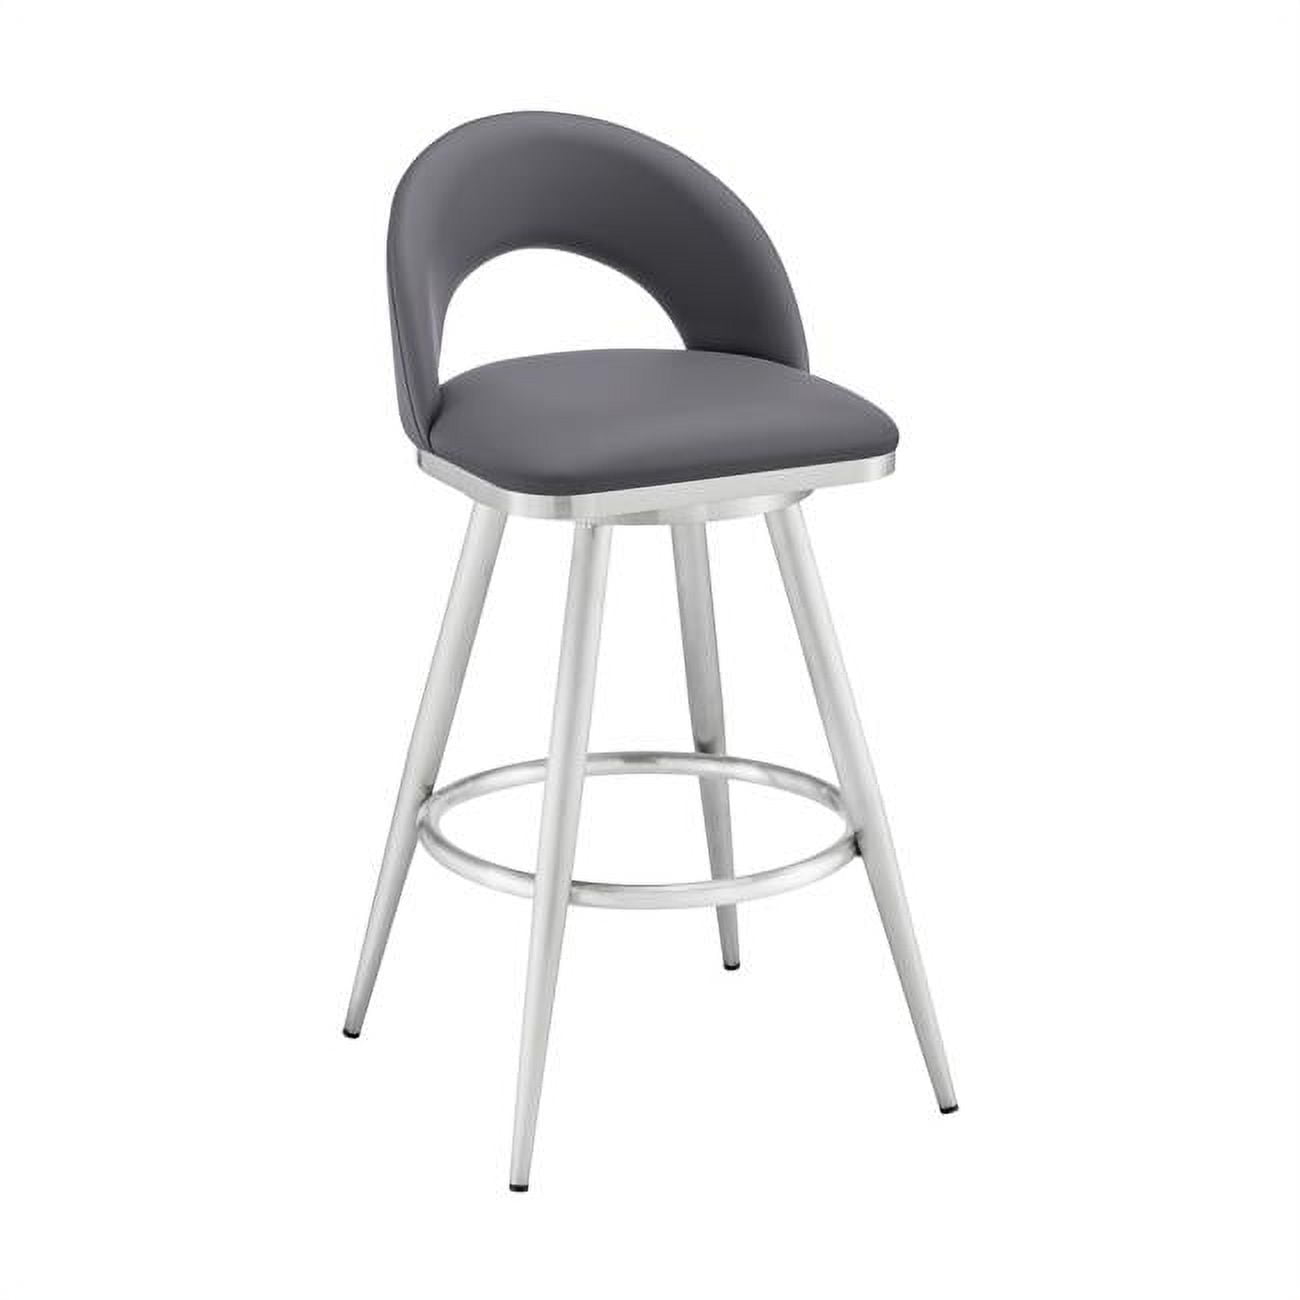 Picture of Armen Living 840254335363 34 x 17 x 20.5 in. Lottech Swivel Counter Stool in Brushed Stainless Steel & Grey Faux Leather